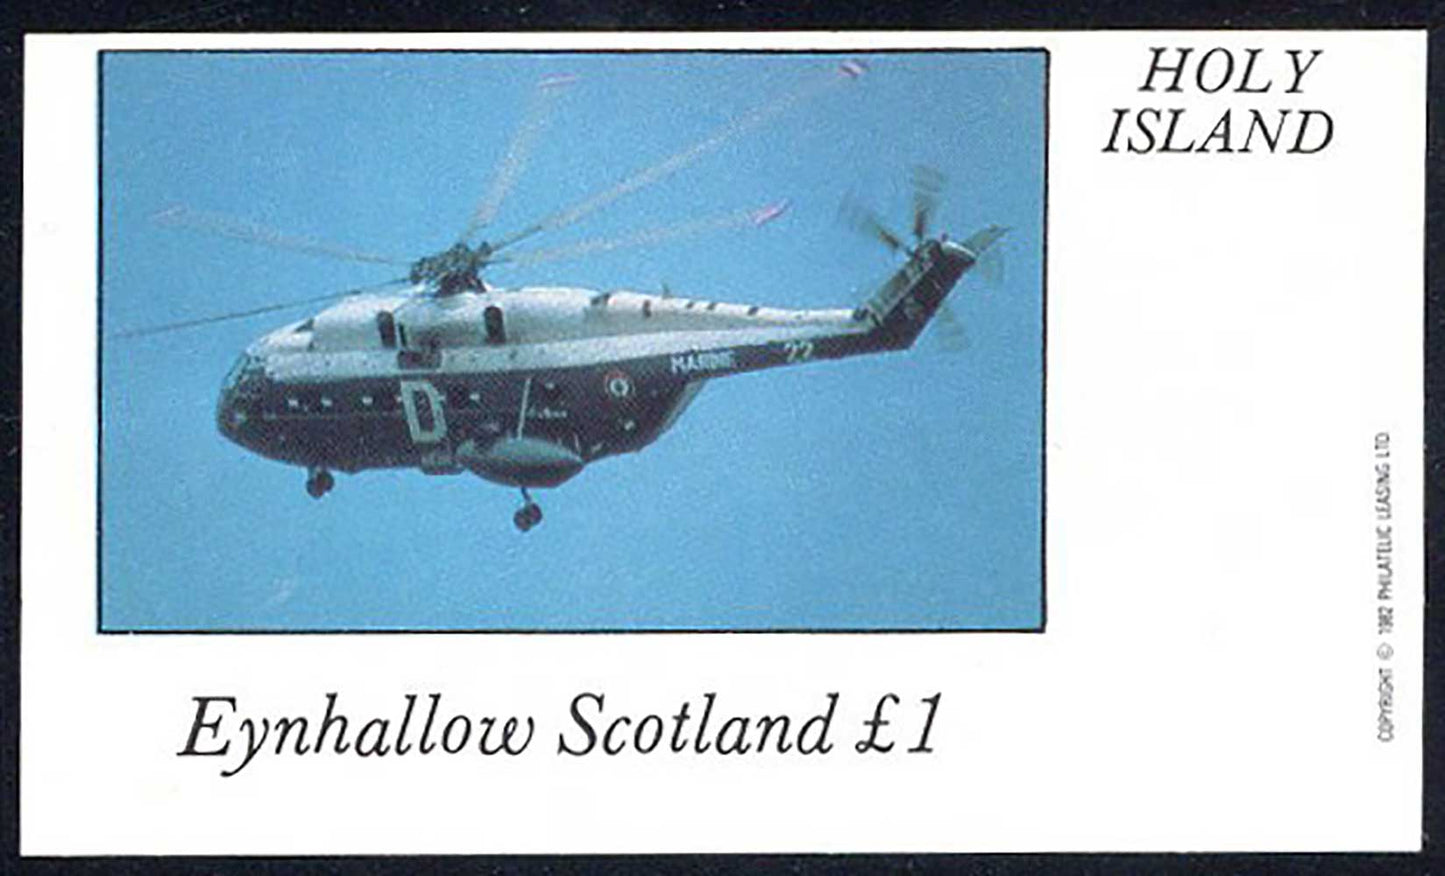 Eynhallow Rescue Helicopter £1